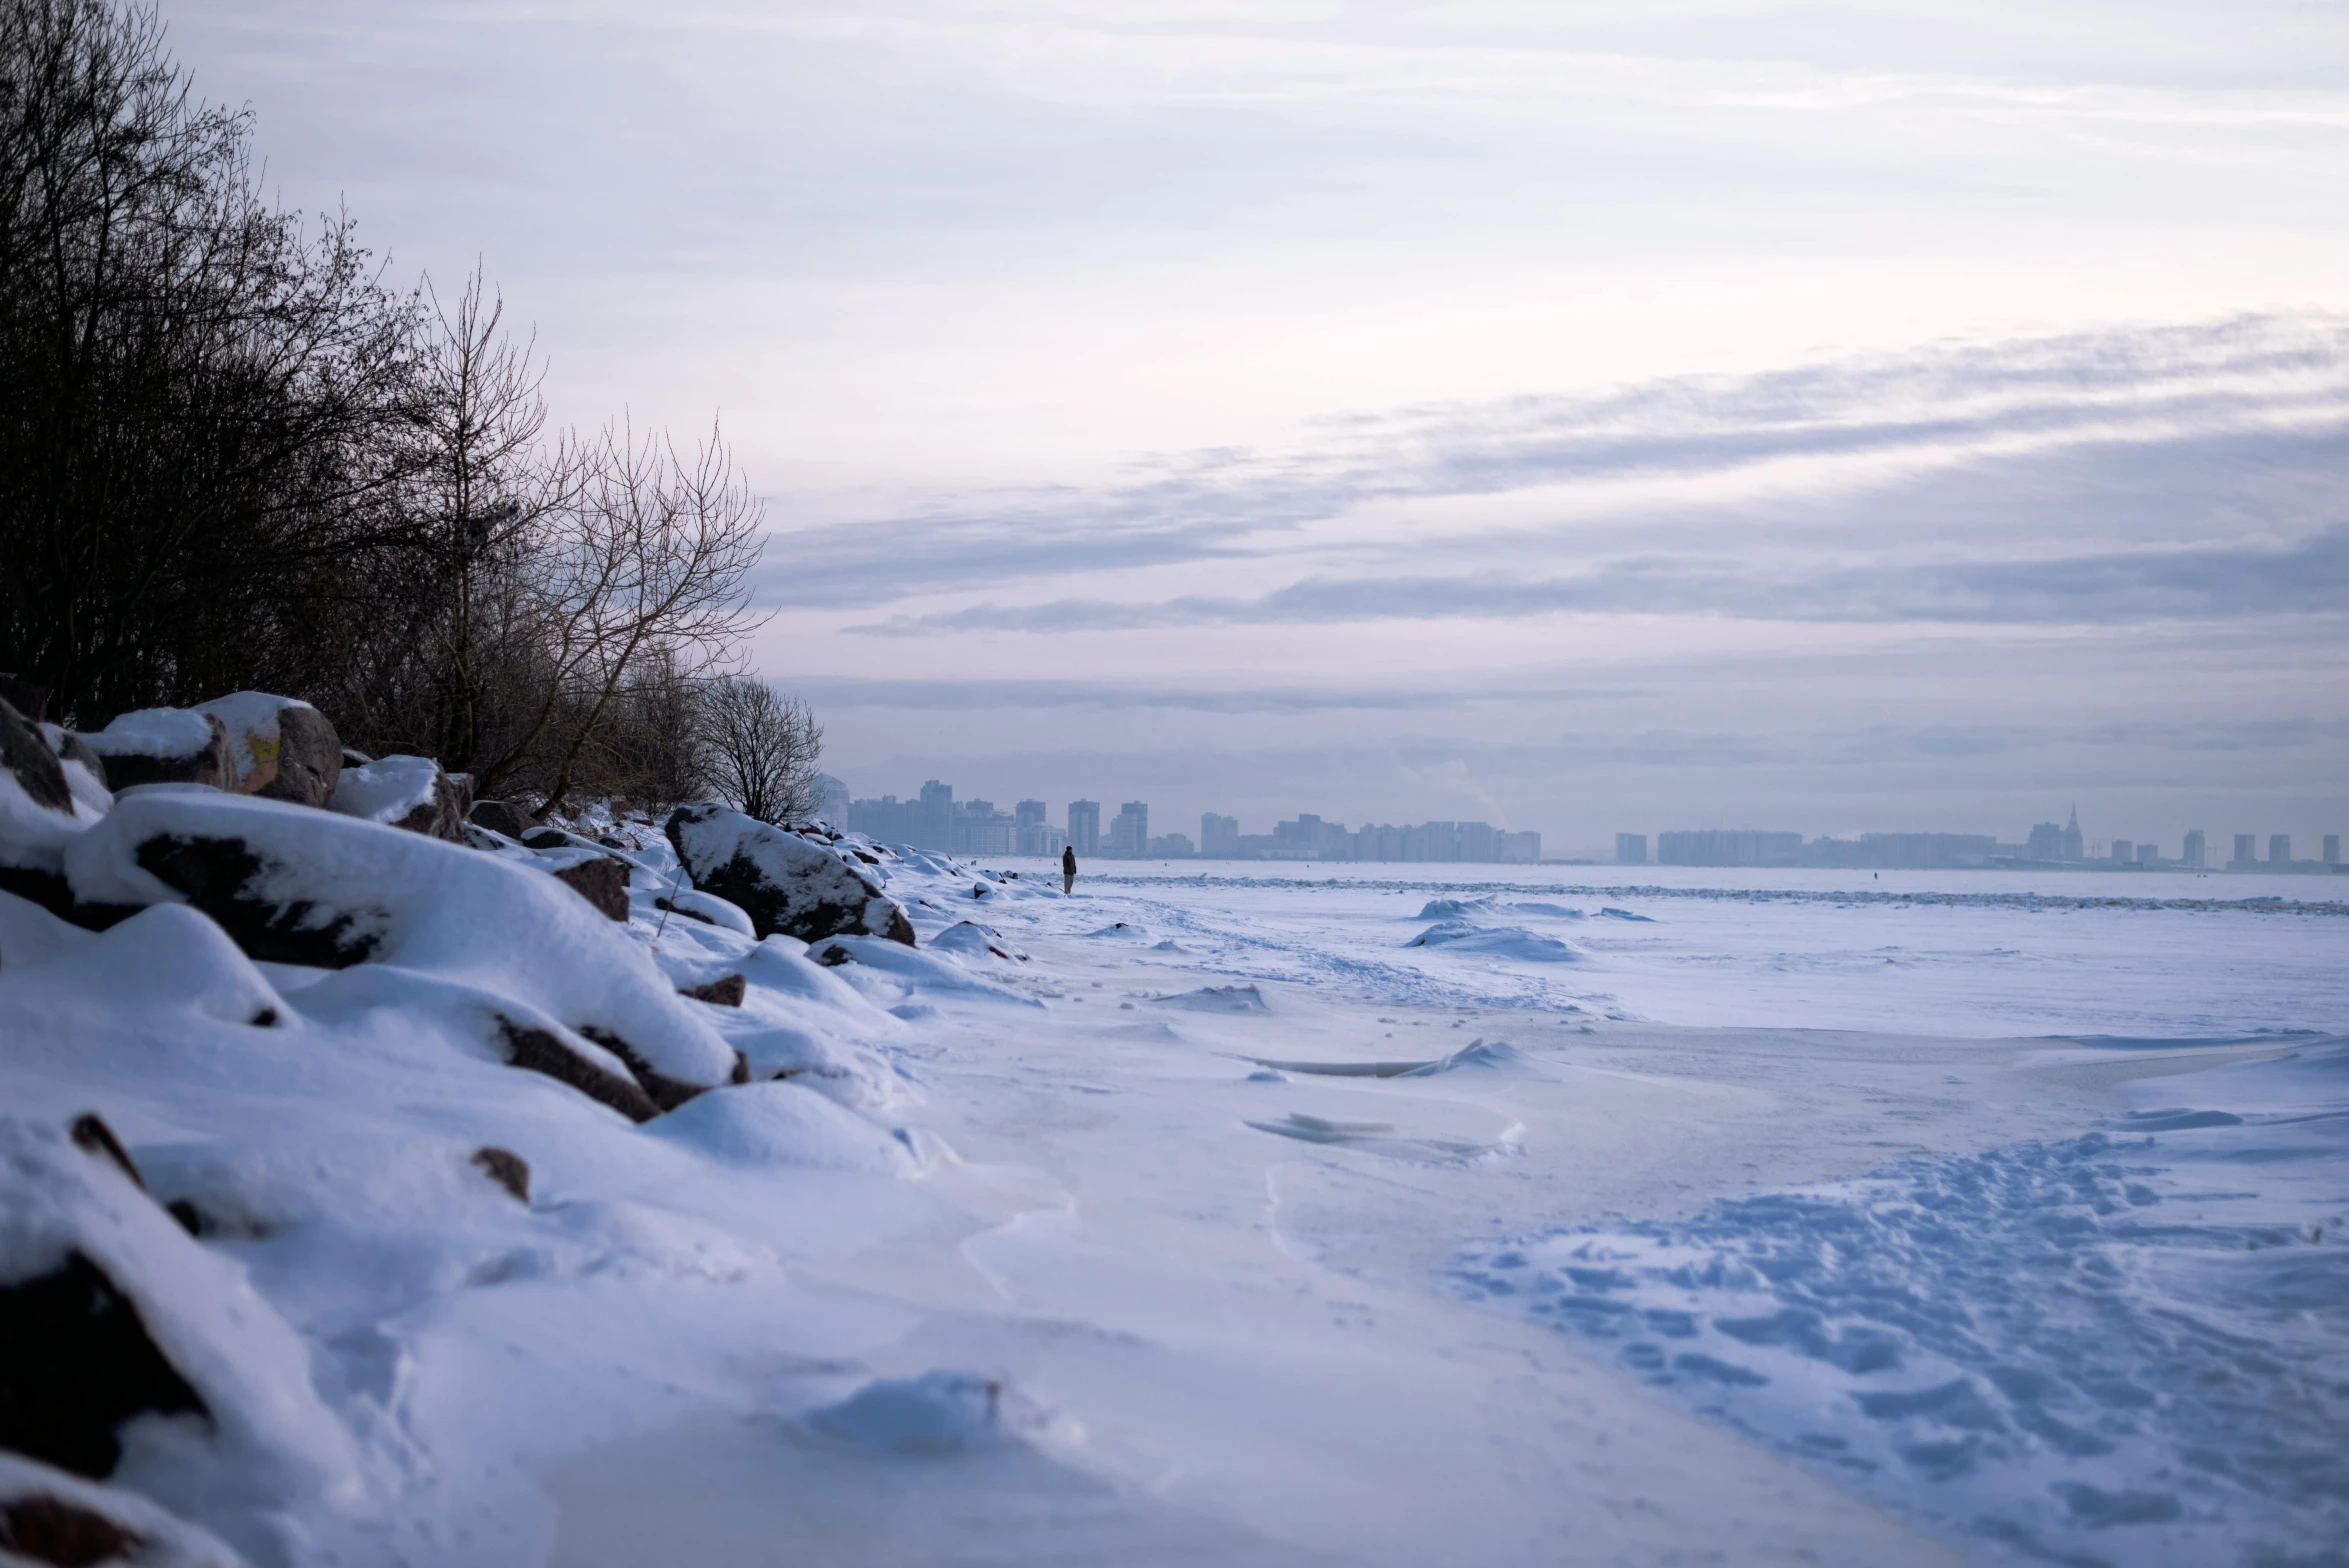 snowy path next to a city on the edge of an icy water beach